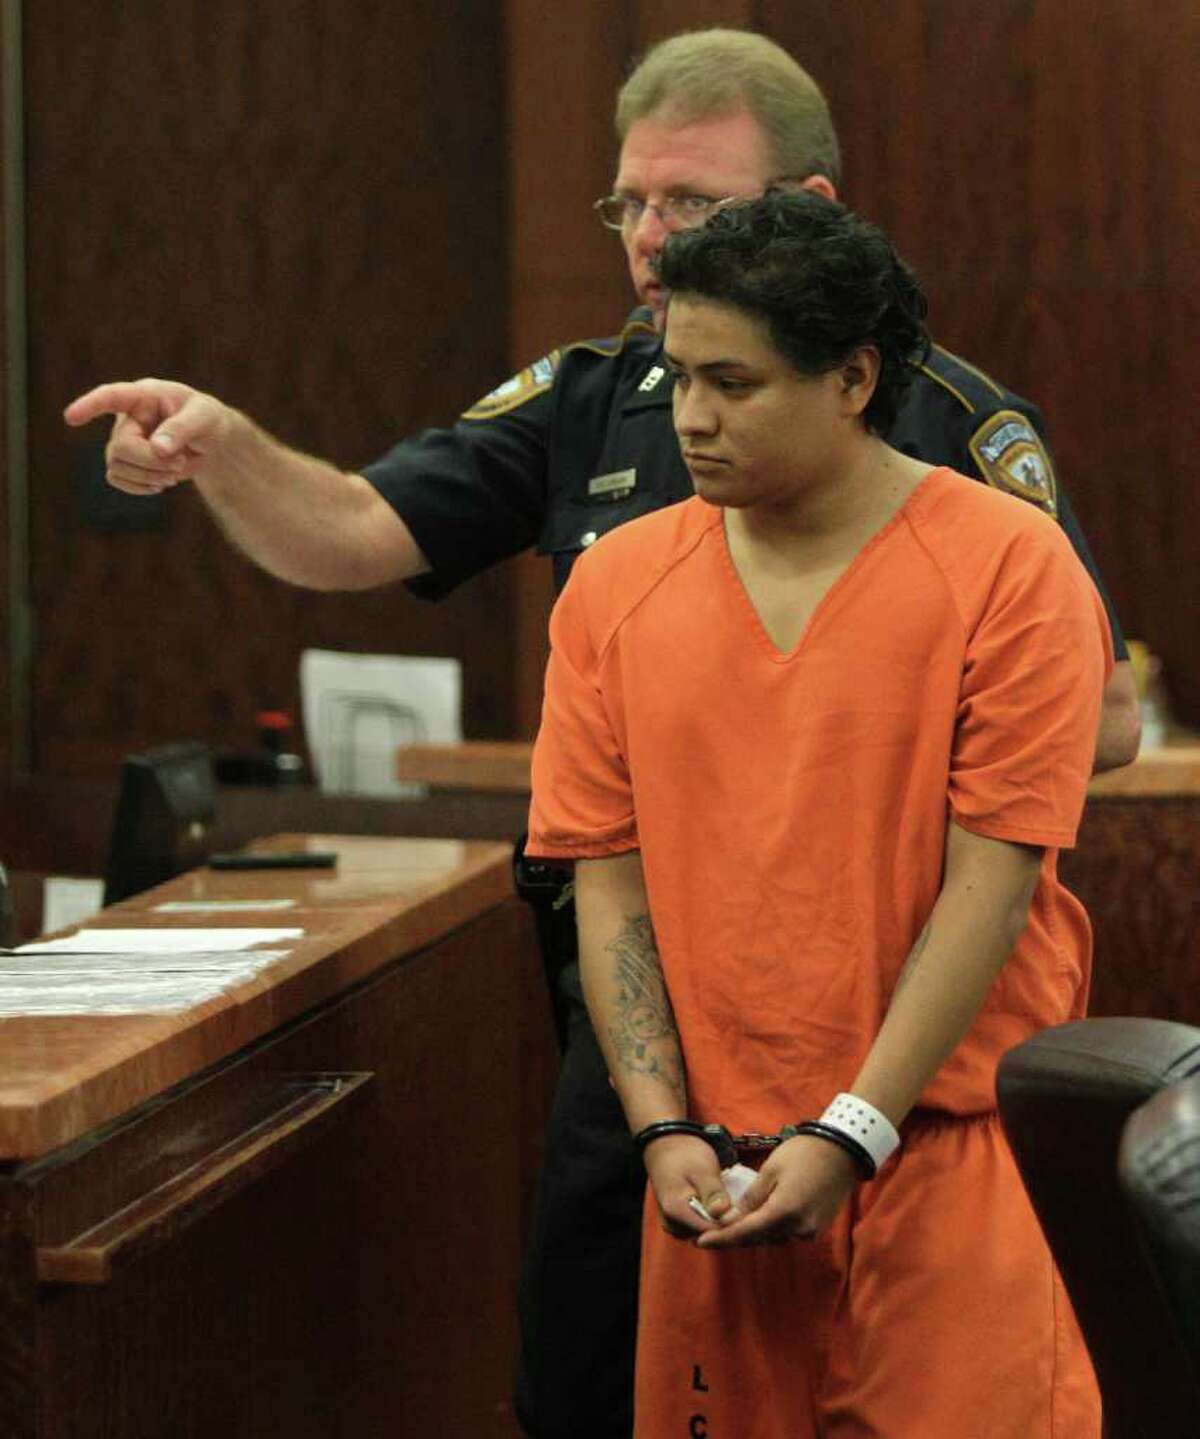 Luis Hector Lopez-Rodriguez, 27, who is a suspected drunk driver accused of crashing into a home killing one child and injuring another, is escorted from the 185th State District Court at the Harris County Criminal Courthouse, 1201 Franklin, Tuesday, March 20, 2012, in Houston. He is accused of losing control of the car he was driving and plowing into the front porch of an apartment, where two children were playing during a Saturday night party. Jesus Ordonez, 7, was killed when the vehicle rammed into the front porch and Christopher Cruz, 4, was in critical condition with burns over 40 percent of his body. ( Melissa Phillip / Houston Chronicle )